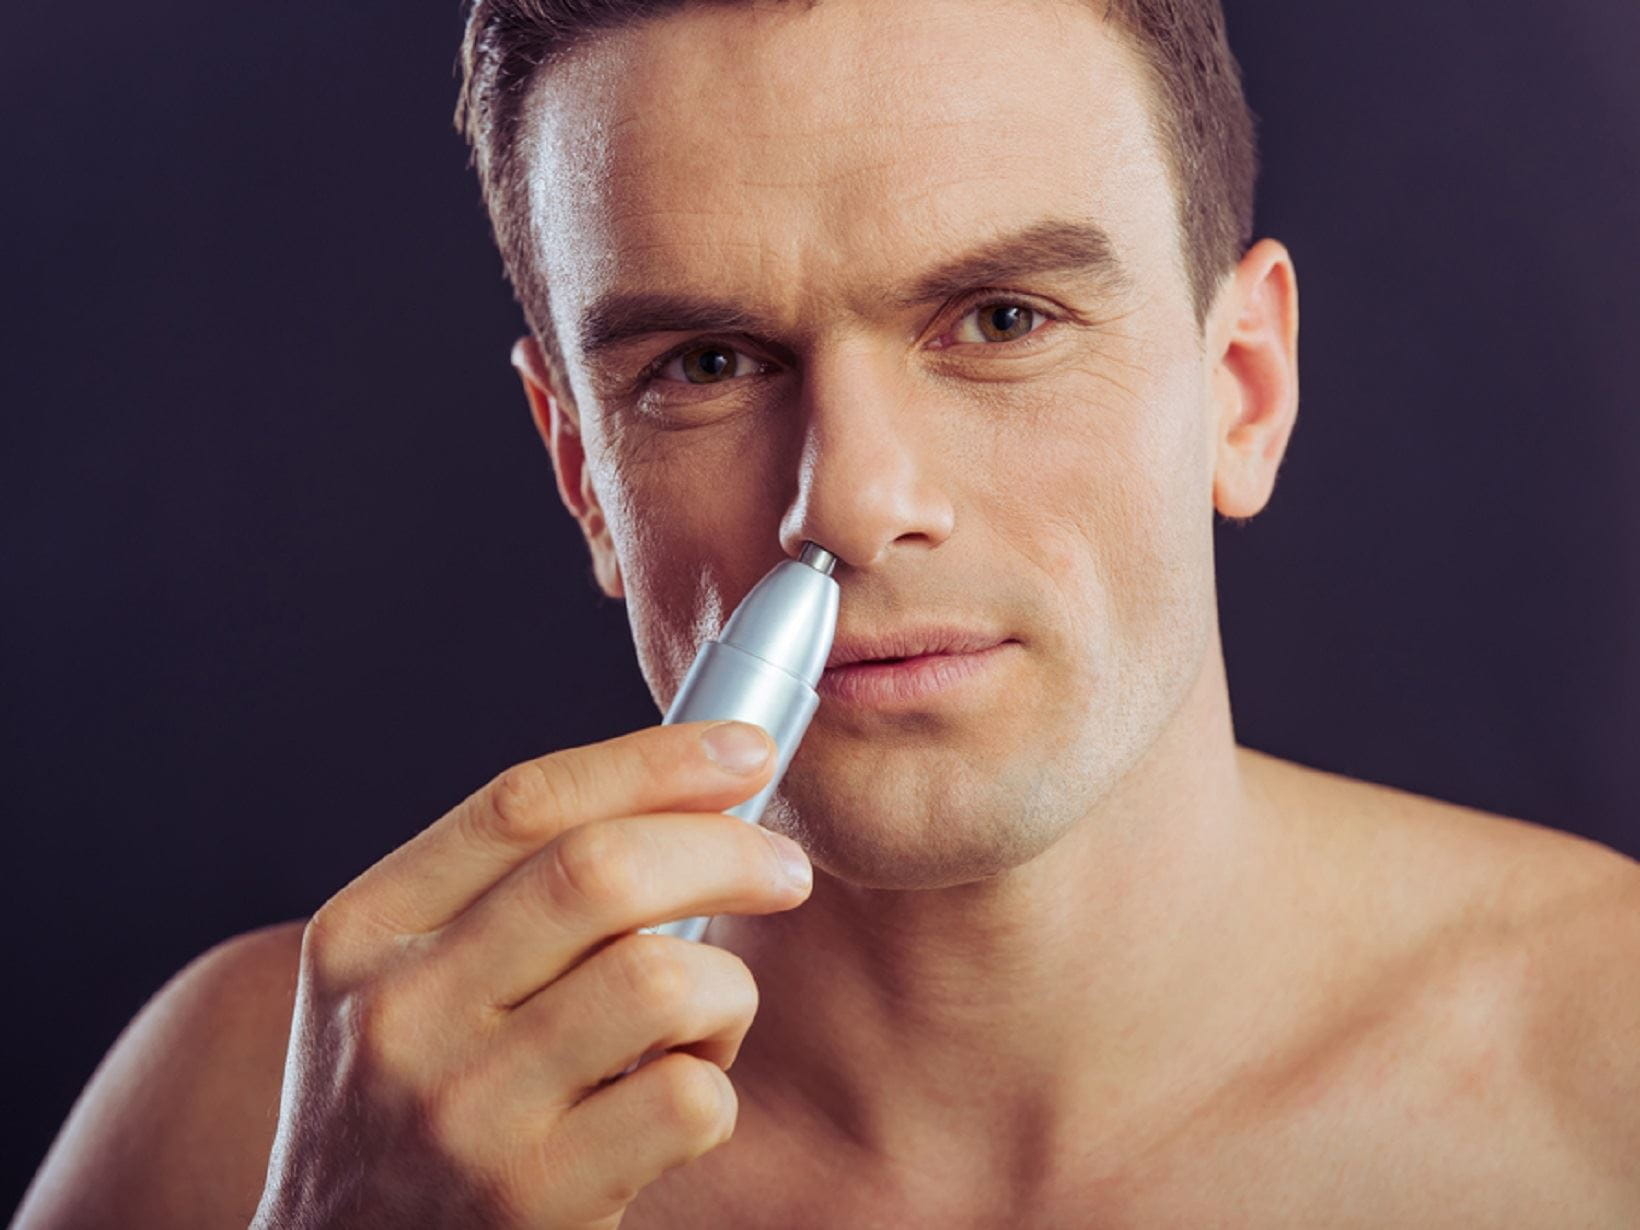 manscaping using a nose hair trimmer